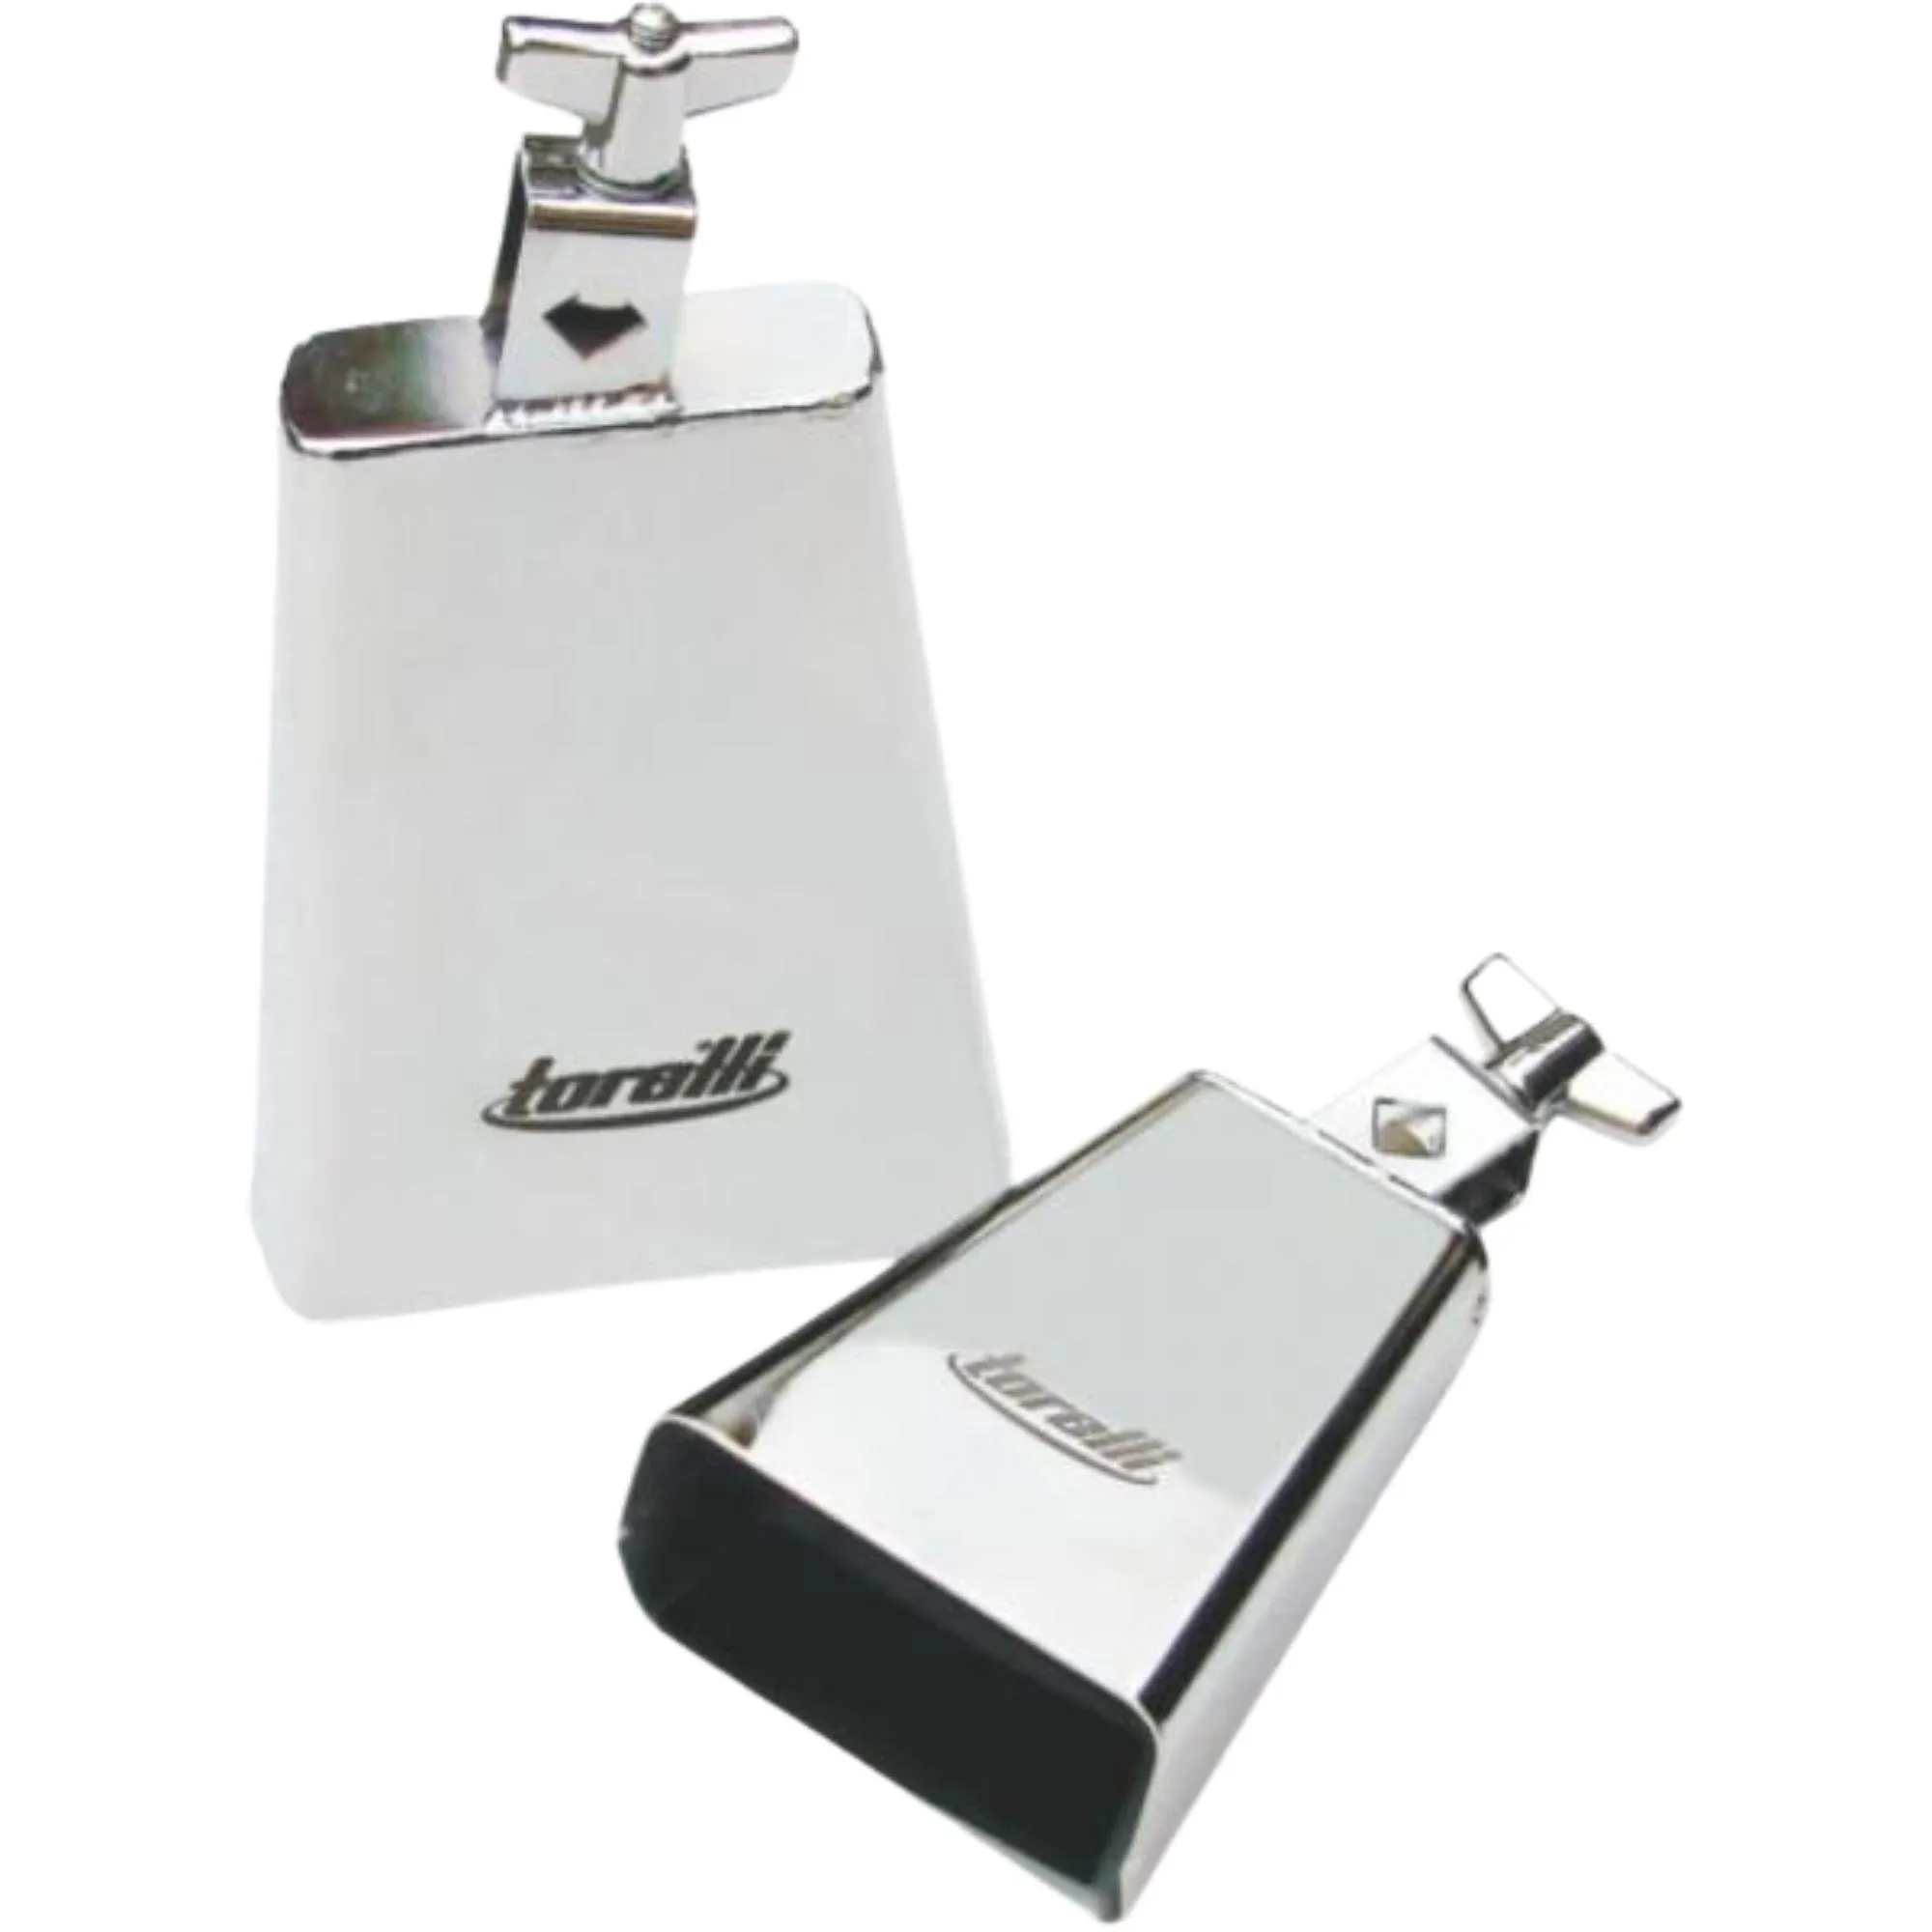 Cowbell Torelli 4\" TO054 Cromado (82205)